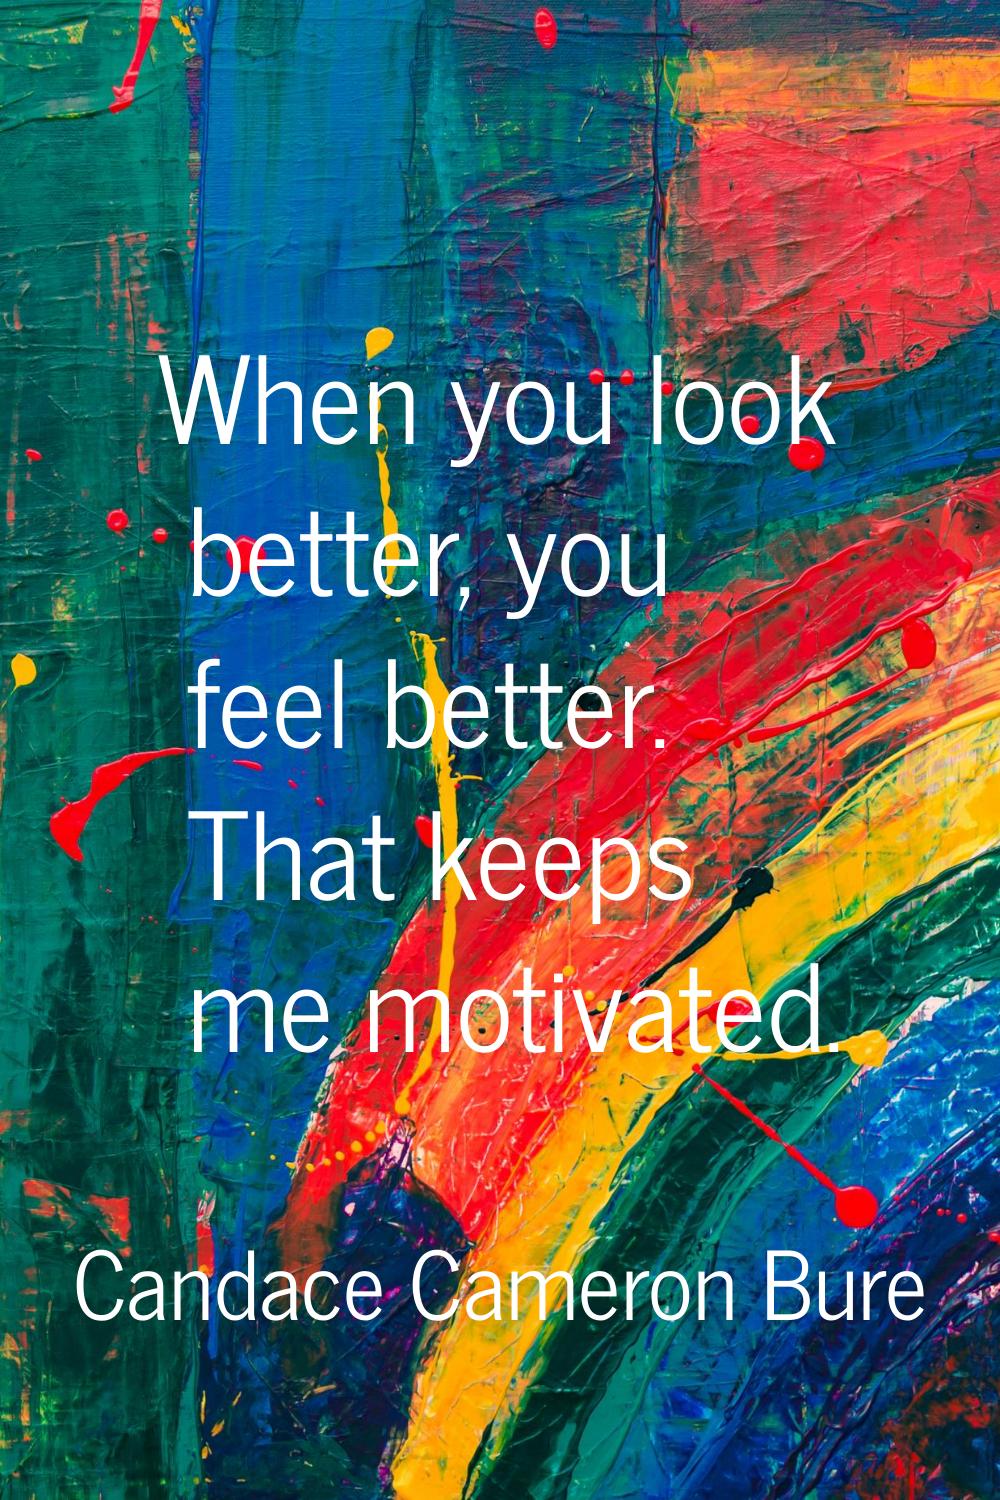 When you look better, you feel better. That keeps me motivated.